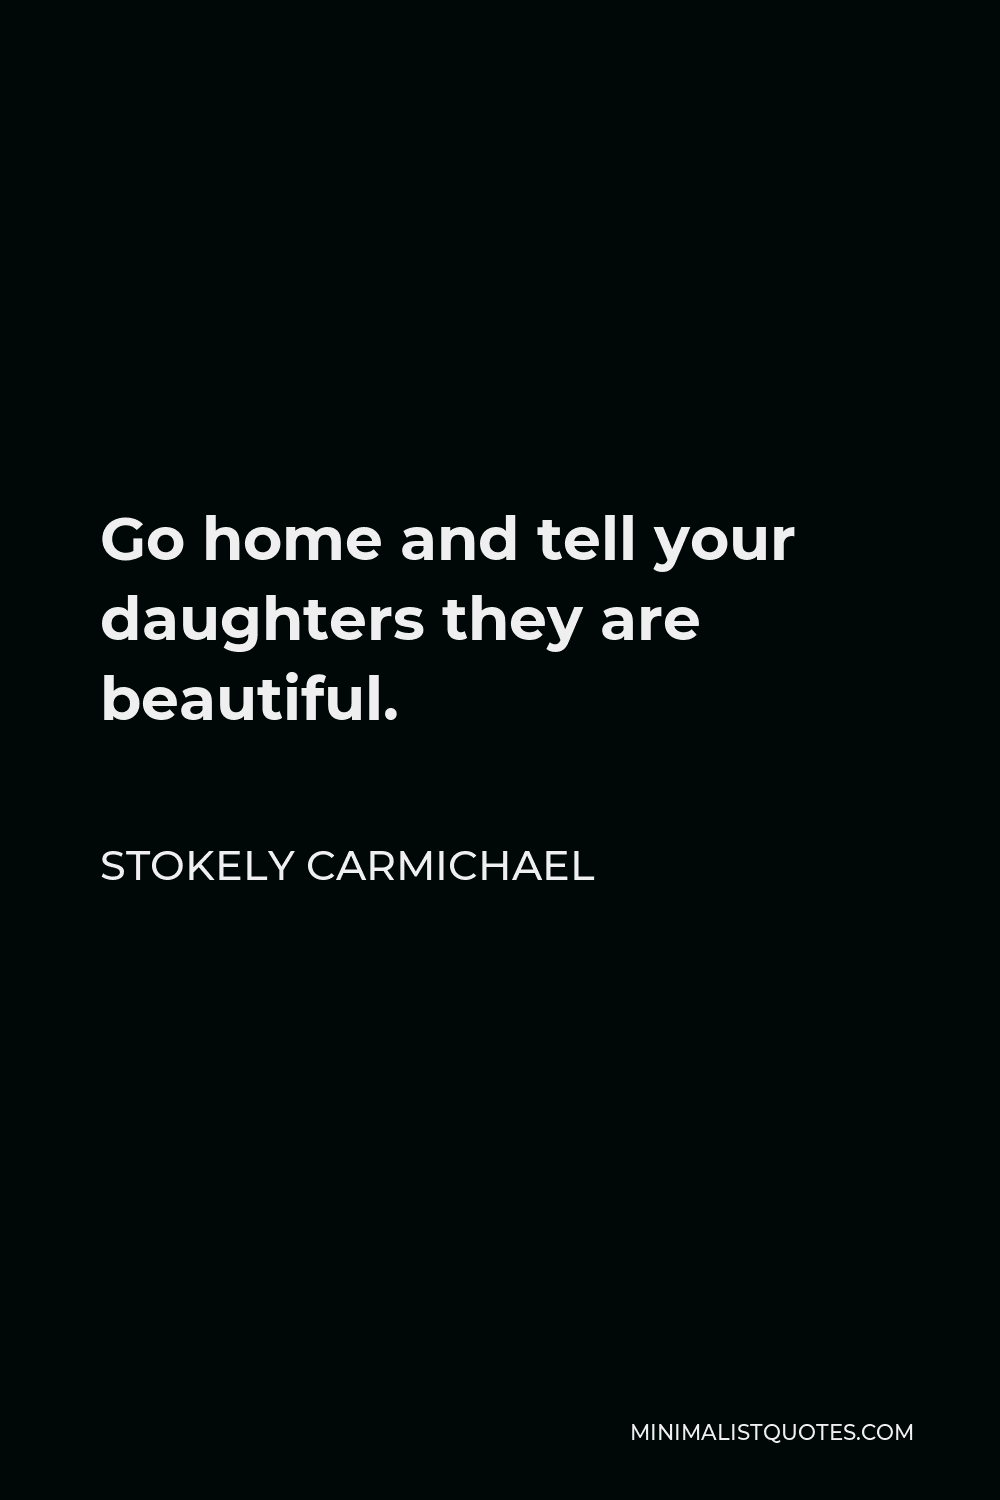 Stokely Carmichael Quote - Go home and tell your daughters they are beautiful.